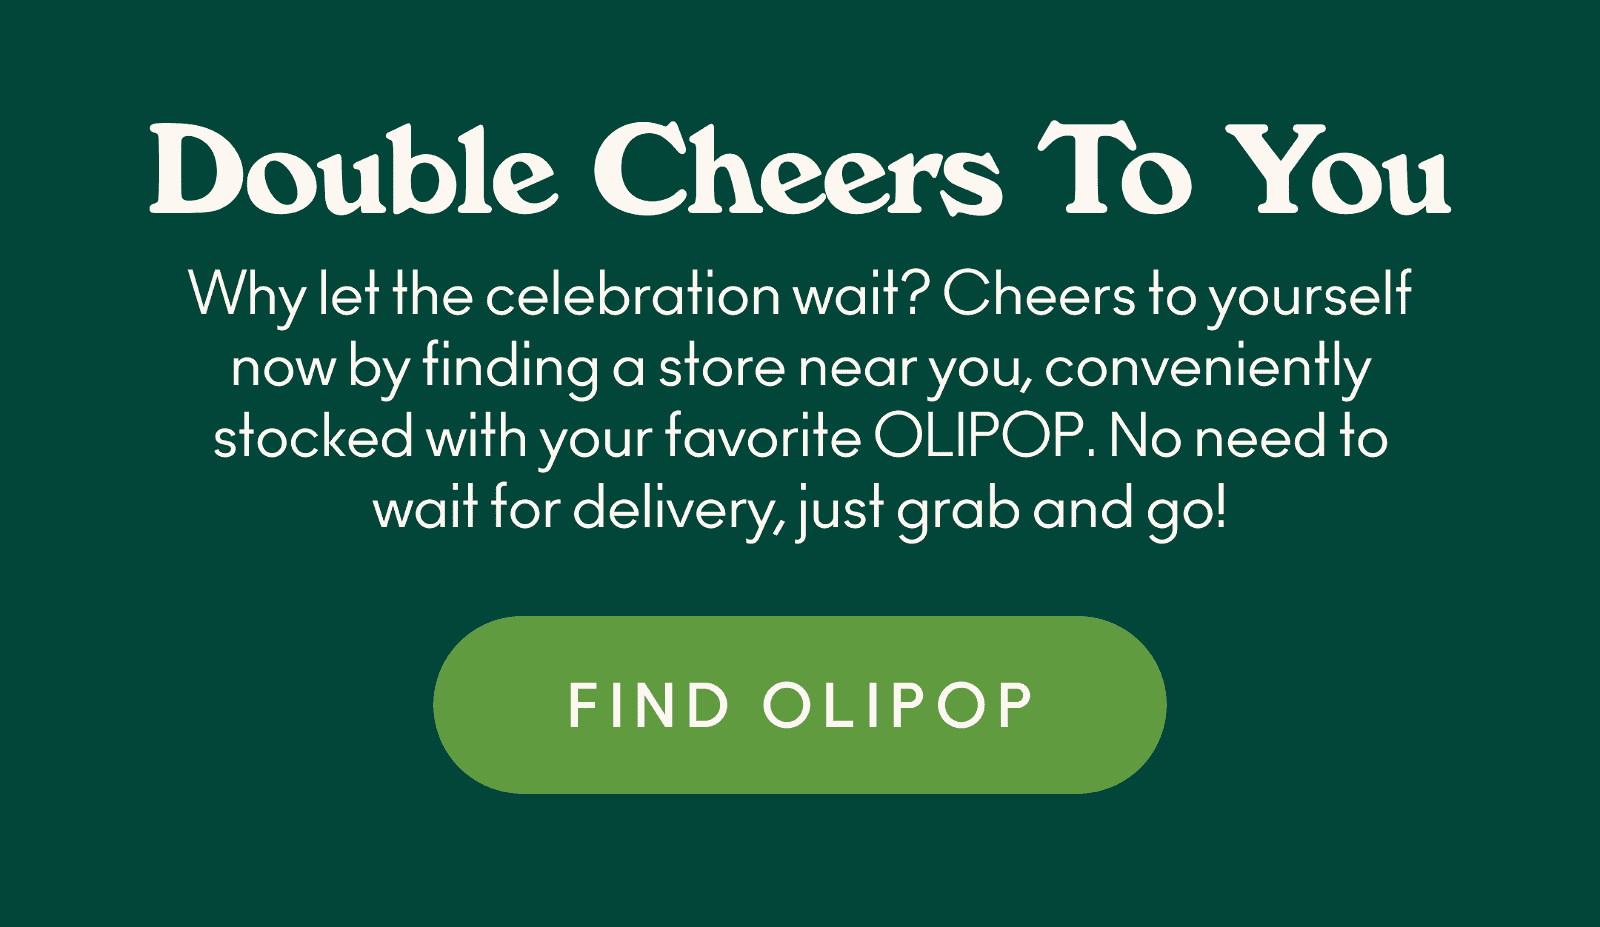 Why let the celebration wait? Cheers to yourself now by finding a store near you, conveniently stocked with your favorite OLIPOP. No need to wait for delivery, just grab and go!